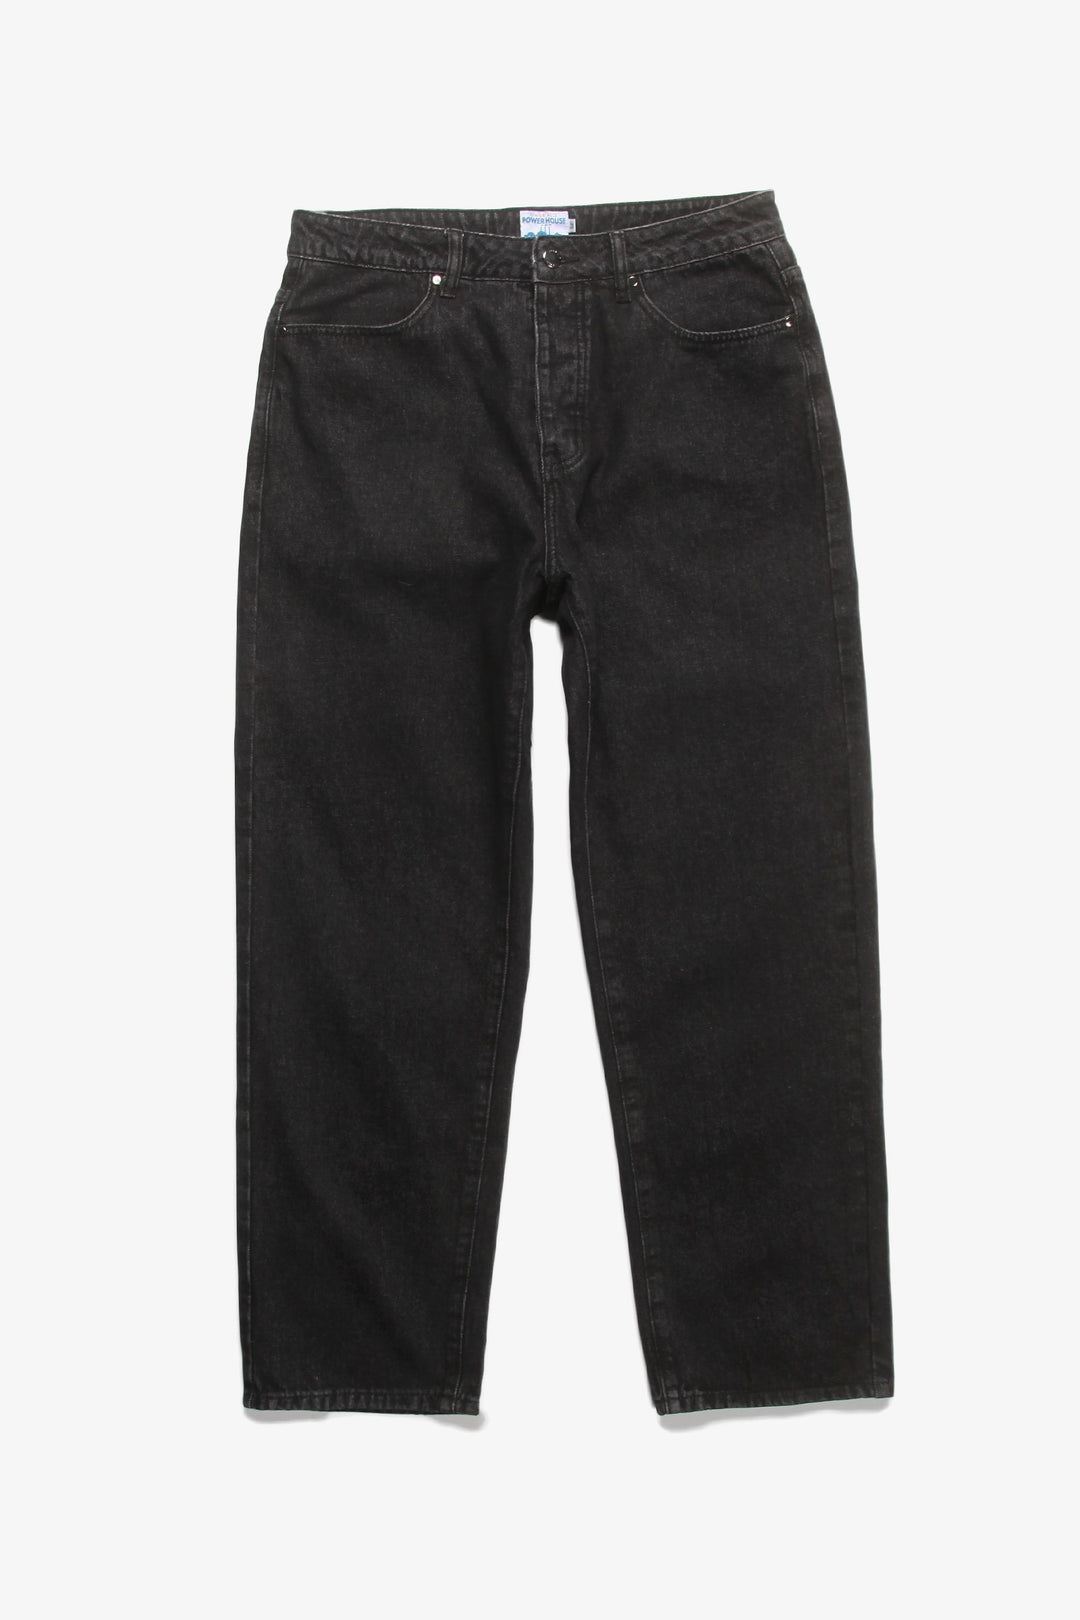 Power Goods - 90's Jeans - Washed Black – Blacksmith Store